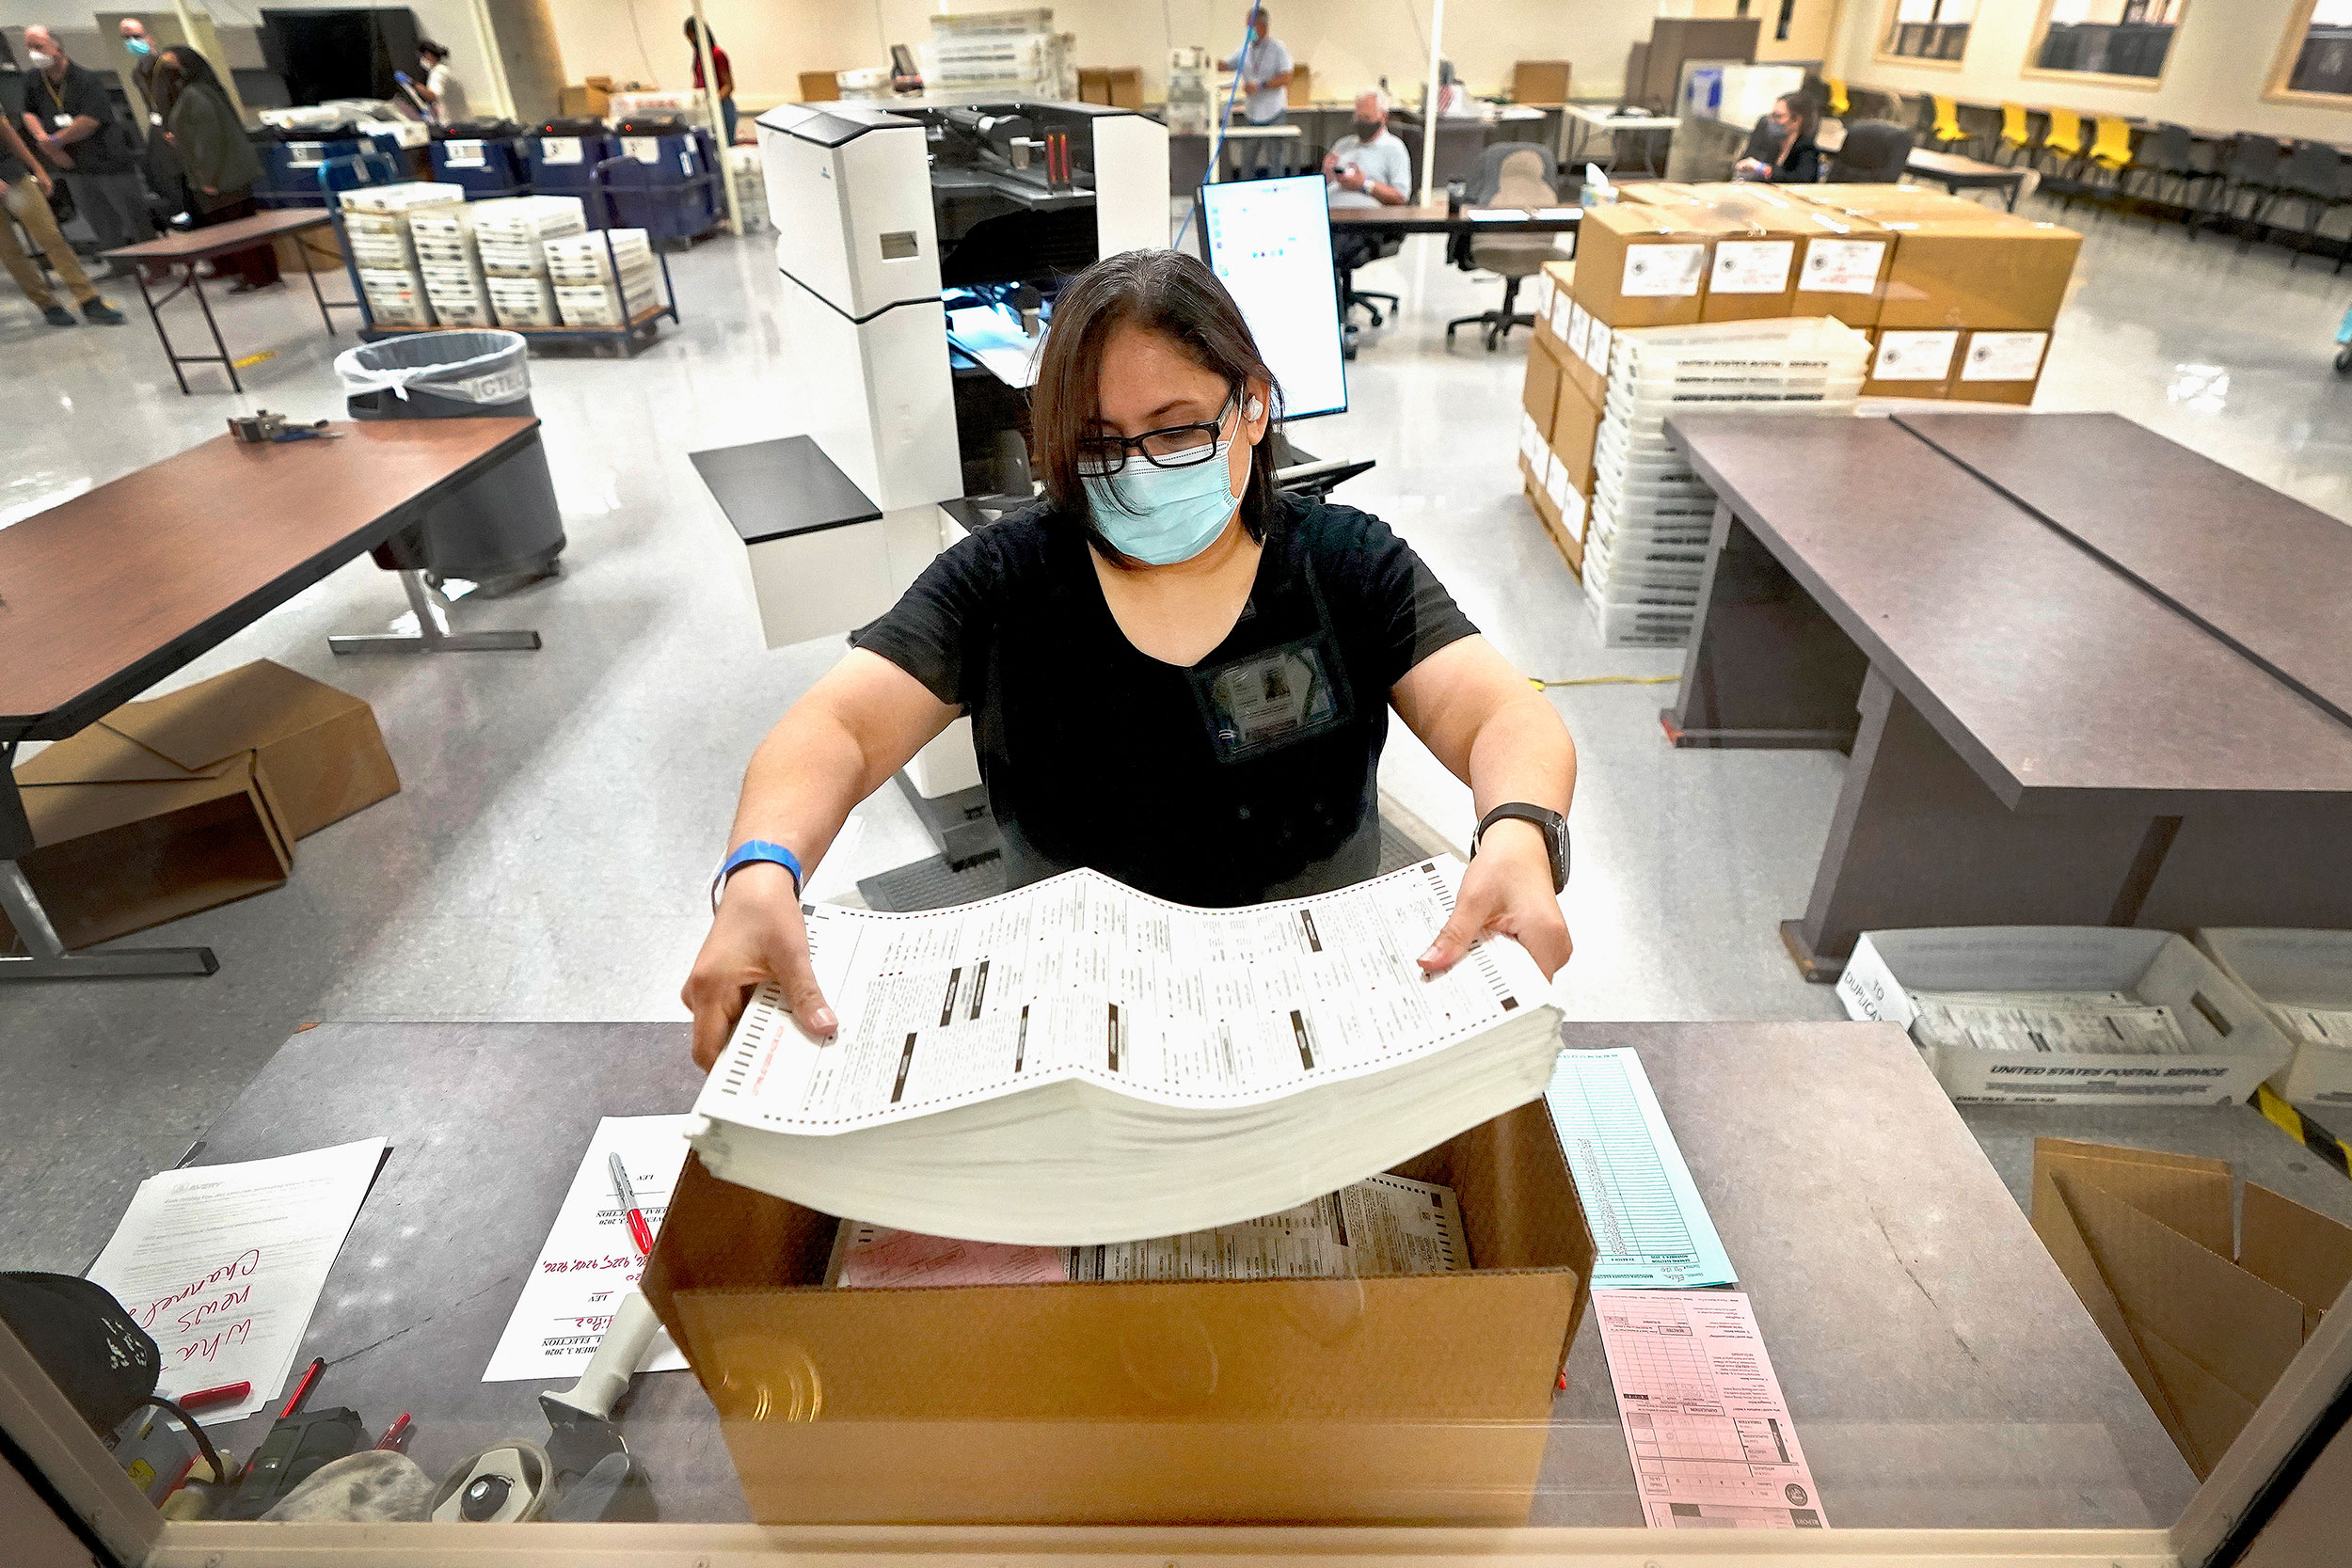 An election official counts ballots inside the Maricopa County Recorder's Office on November 6 in Phoenix, Arizona.